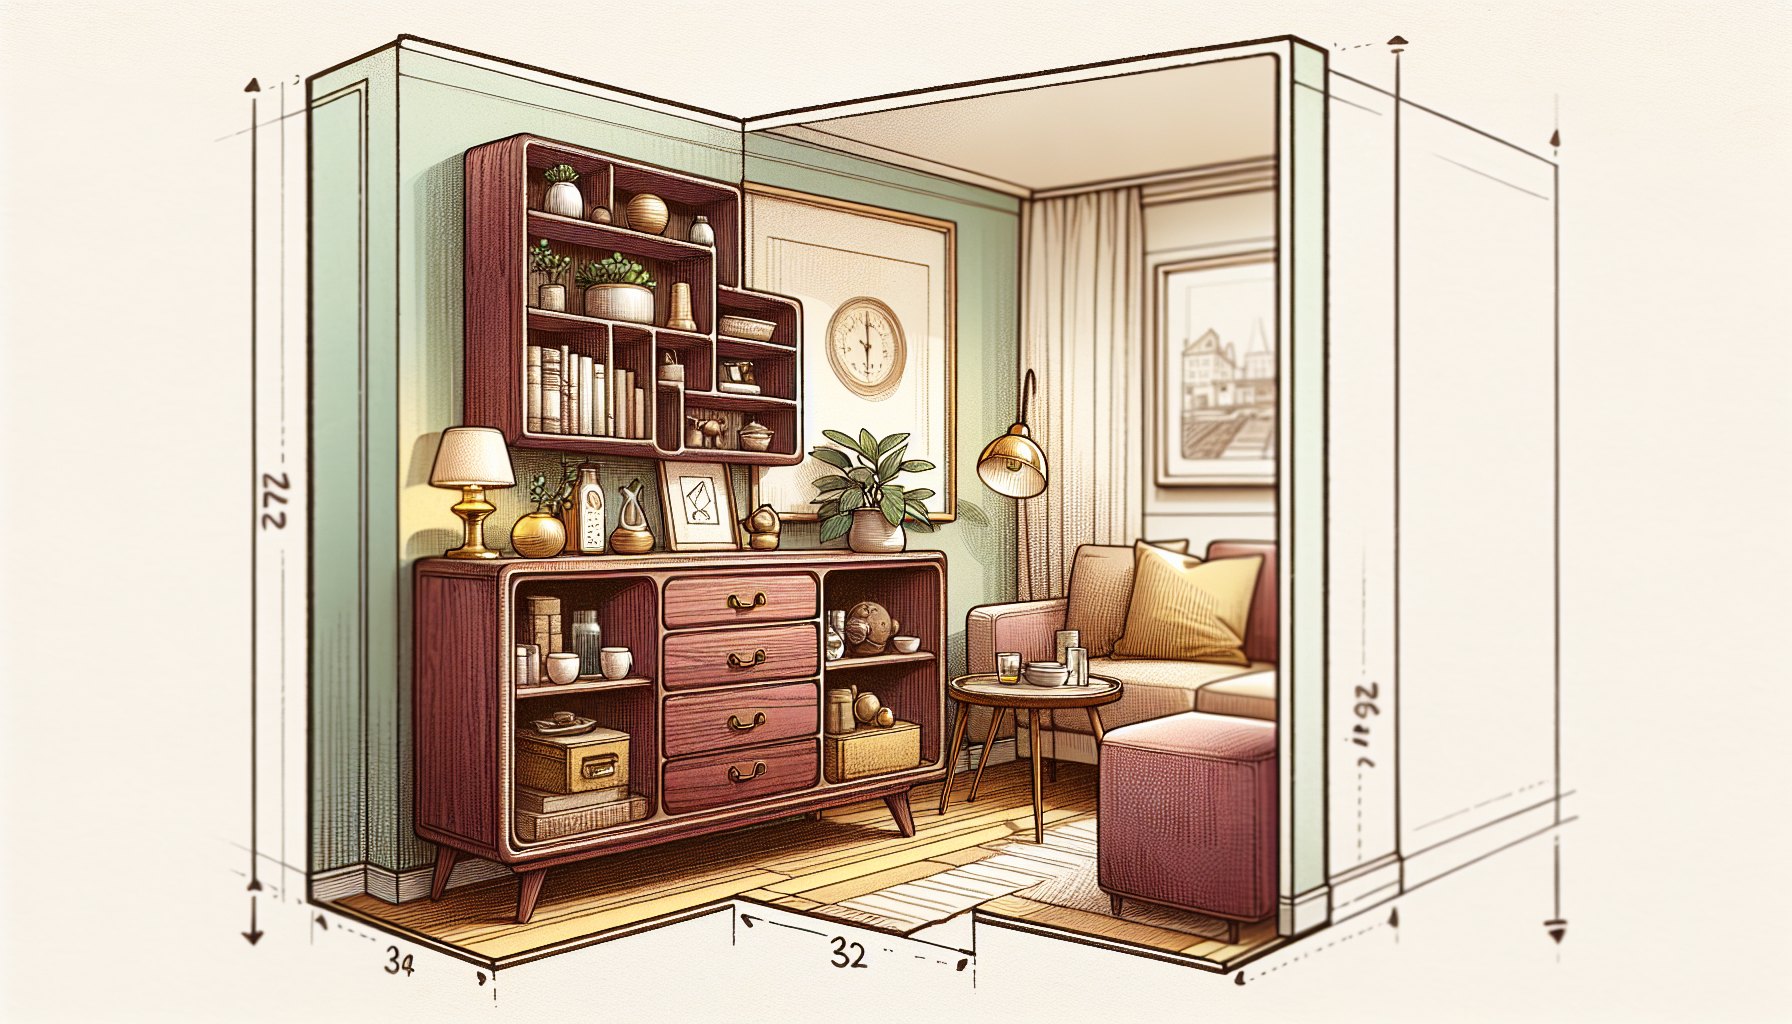 Illustration of a compact credenza in a small space